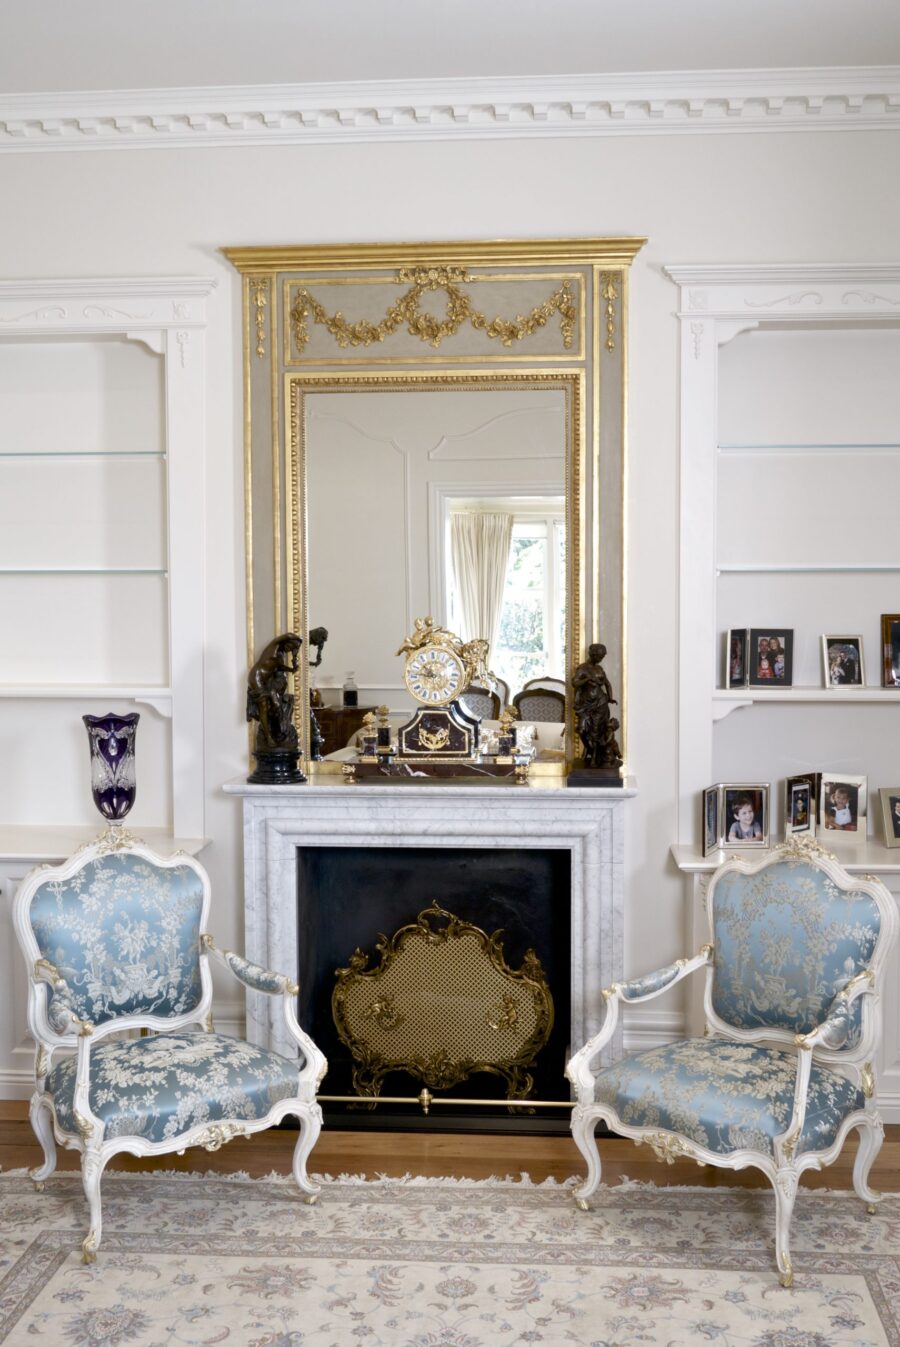 Classic French White Salon Chairs with Gold Details